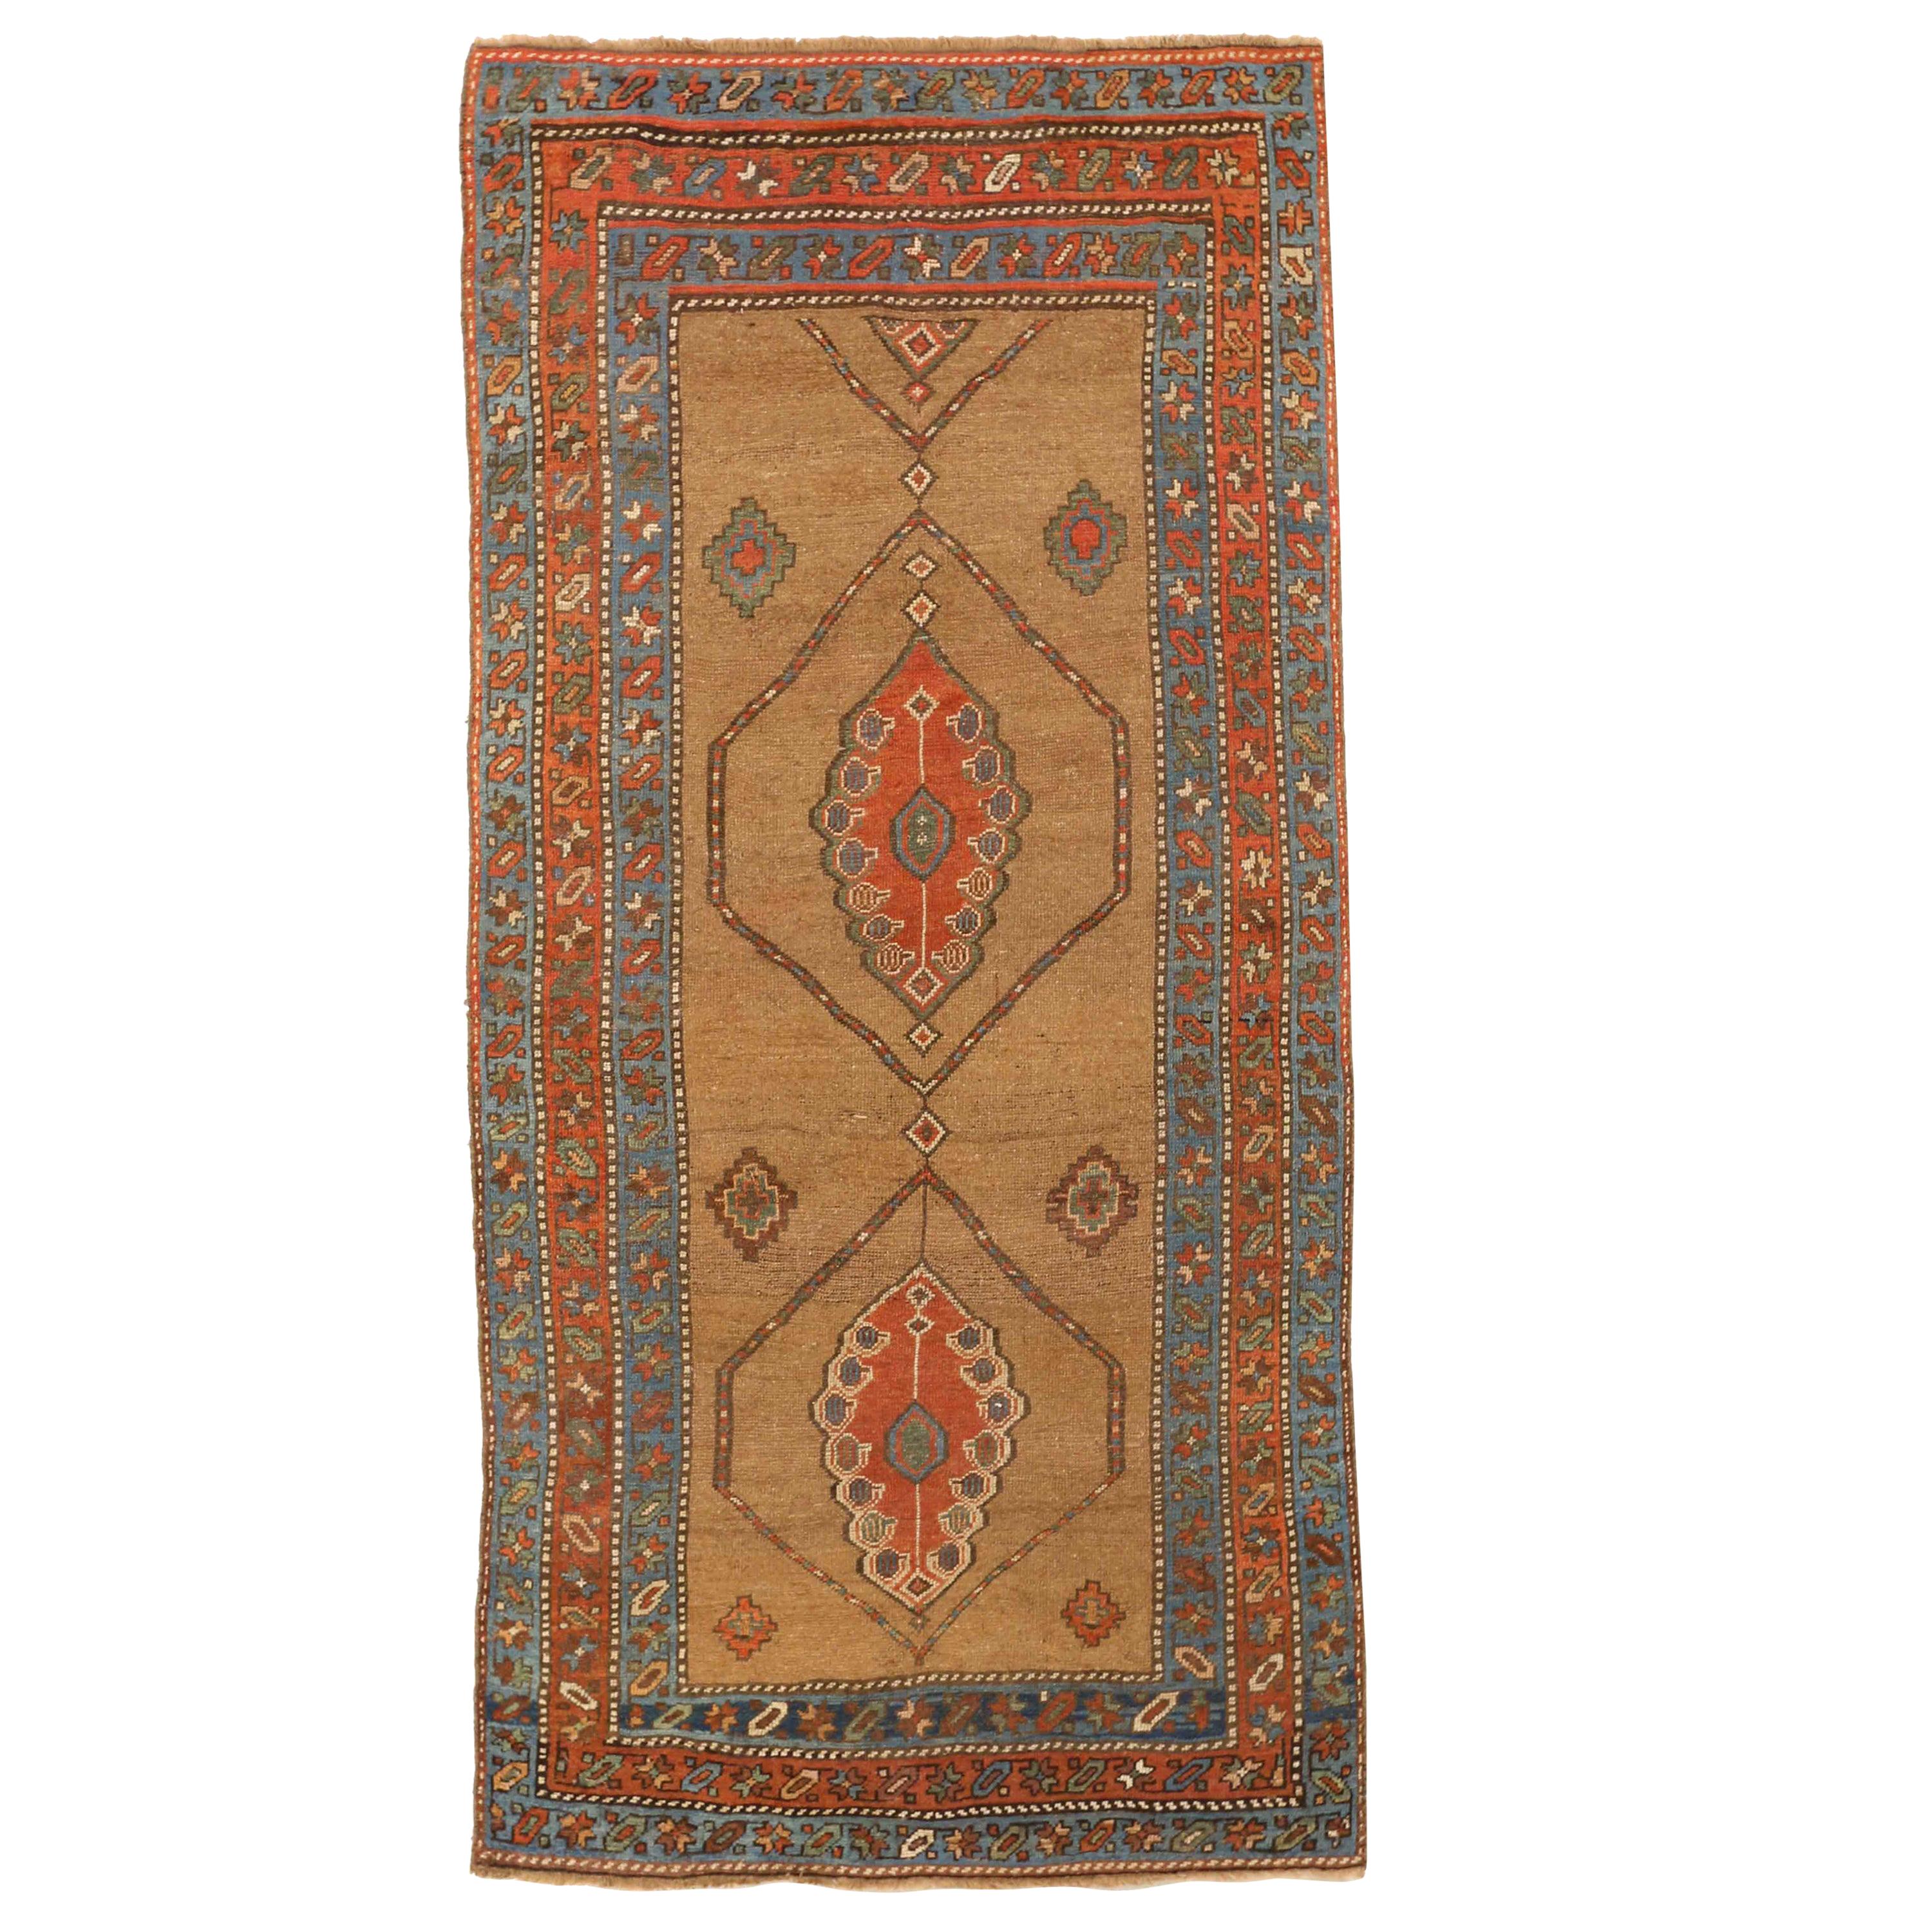 Antique Persian Kurdish Rug with Mixed Floral and Geometric Patterns For Sale